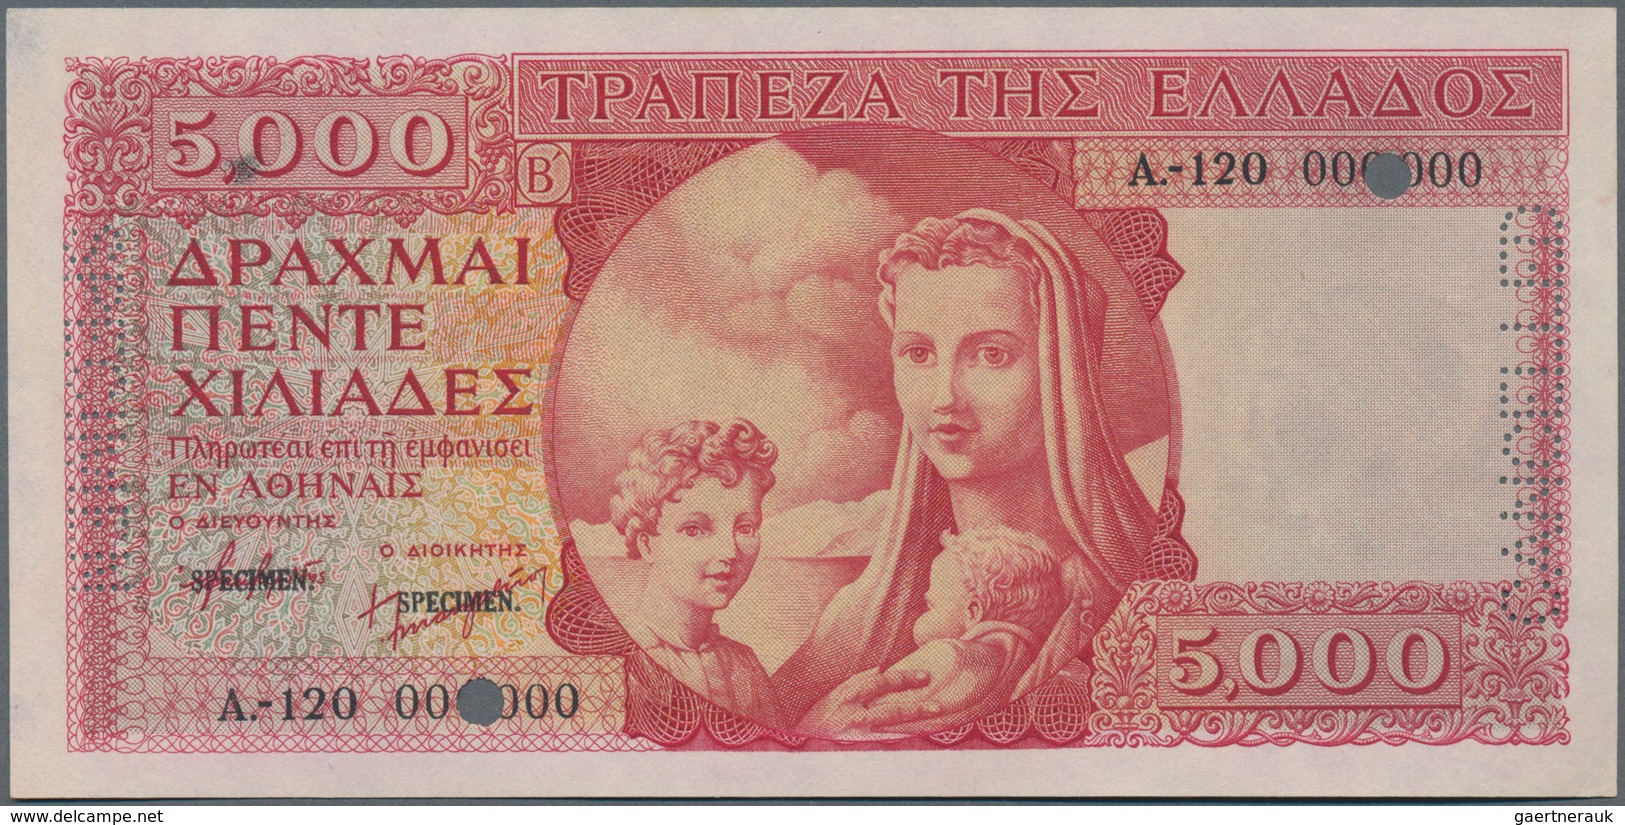 Greece / Griechenland: 5000 Drachmai ND(1945) SPECIMEN, P.173s With Serial Number A-120 000000, Blac - Grecia